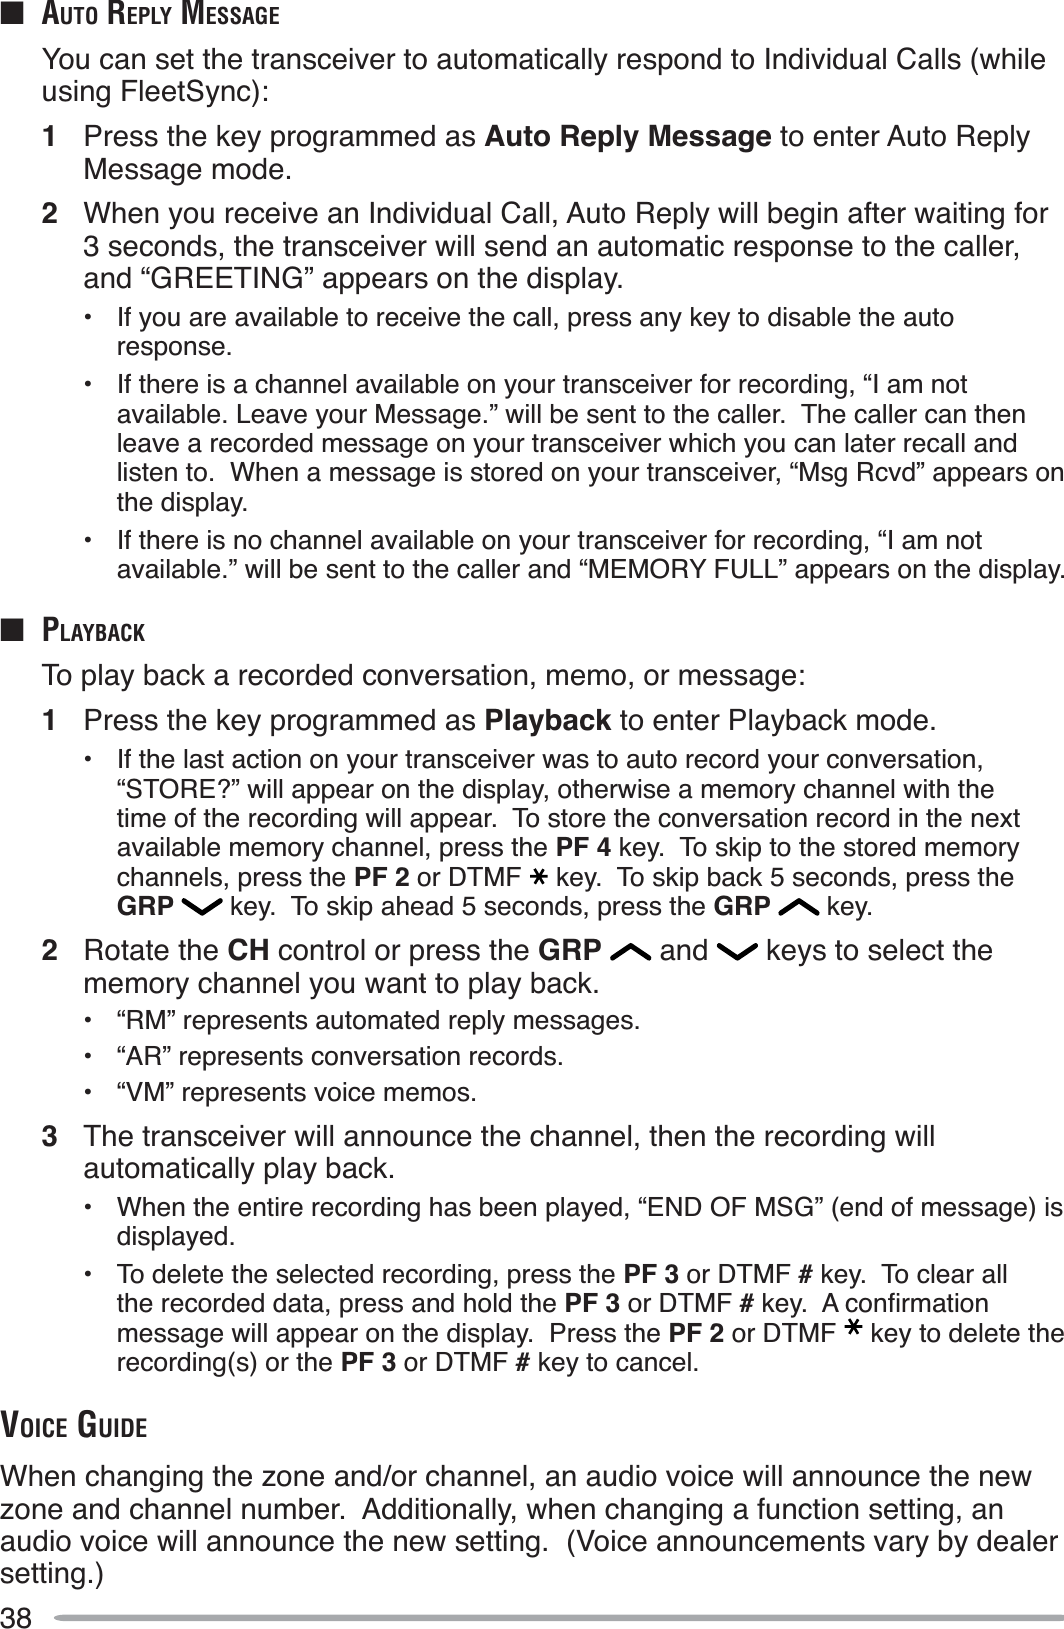 38QAUTO REPLY MESSAGEYou can set the transceiver to automatically respond to Individual Calls (while using FleetSync):1Press the key programmed as Auto Reply Message to enter Auto Reply Message mode.2When you receive an Individual Call, Auto Reply will begin after waiting for 3 seconds, the transceiver will send an automatic response to the caller, and “GREETING” appears on the display.• If you are available to receive the call, press any key to disable the auto response.• If there is a channel available on your transceiver for recording, “I am not available. Leave your Message.” will be sent to the caller.  The caller can then leave a recorded message on your transceiver which you can later recall and listen to.  When a message is stored on your transceiver, “Msg Rcvd” appears on the display. • If there is no channel available on your transceiver for recording, “I am not available.” will be sent to the caller and “MEMORY FULL” appears on the display.Q PLAYBACKTo play back a recorded conversation, memo, or message:1Press the key programmed as Playback to enter Playback mode.• If the last action on your transceiver was to auto record your conversation, “STORE?” will appear on the display, otherwise a memory channel with the time of the recording will appear.  To store the conversation record in the next available memory channel, press the PF 4 key.  To skip to the stored memory channels, press the PF 2 or DTMF key.  To skip back 5 seconds, press the GRP  key.  To skip ahead 5 seconds, press the GRP  key.2Rotate the CH control or press the GRP  and   keys to select the memory channel you want to play back.• “RM” represents automated reply messages.• “AR” represents conversation records.• “VM” represents voice memos.3The transceiver will announce the channel, then the recording will automatically play back.• When the entire recording has been played, “END OF MSG” (end of message) is displayed.• To delete the selected recording, press the PF 3 or DTMF # key.  To clear all the recorded data, press and hold the PF 3 or DTMF #NH\$FRQÀUPDWLRQmessage will appear on the display.  Press the PF 2 or DTMF key to delete the recording(s) or the PF 3 or DTMF # key to cancel.VOICE GUIDEWhen changing the zone and/or channel, an audio voice will announce the new zone and channel number.  Additionally, when changing a function setting, an audio voice will announce the new setting.  (Voice announcements vary by dealer setting.)